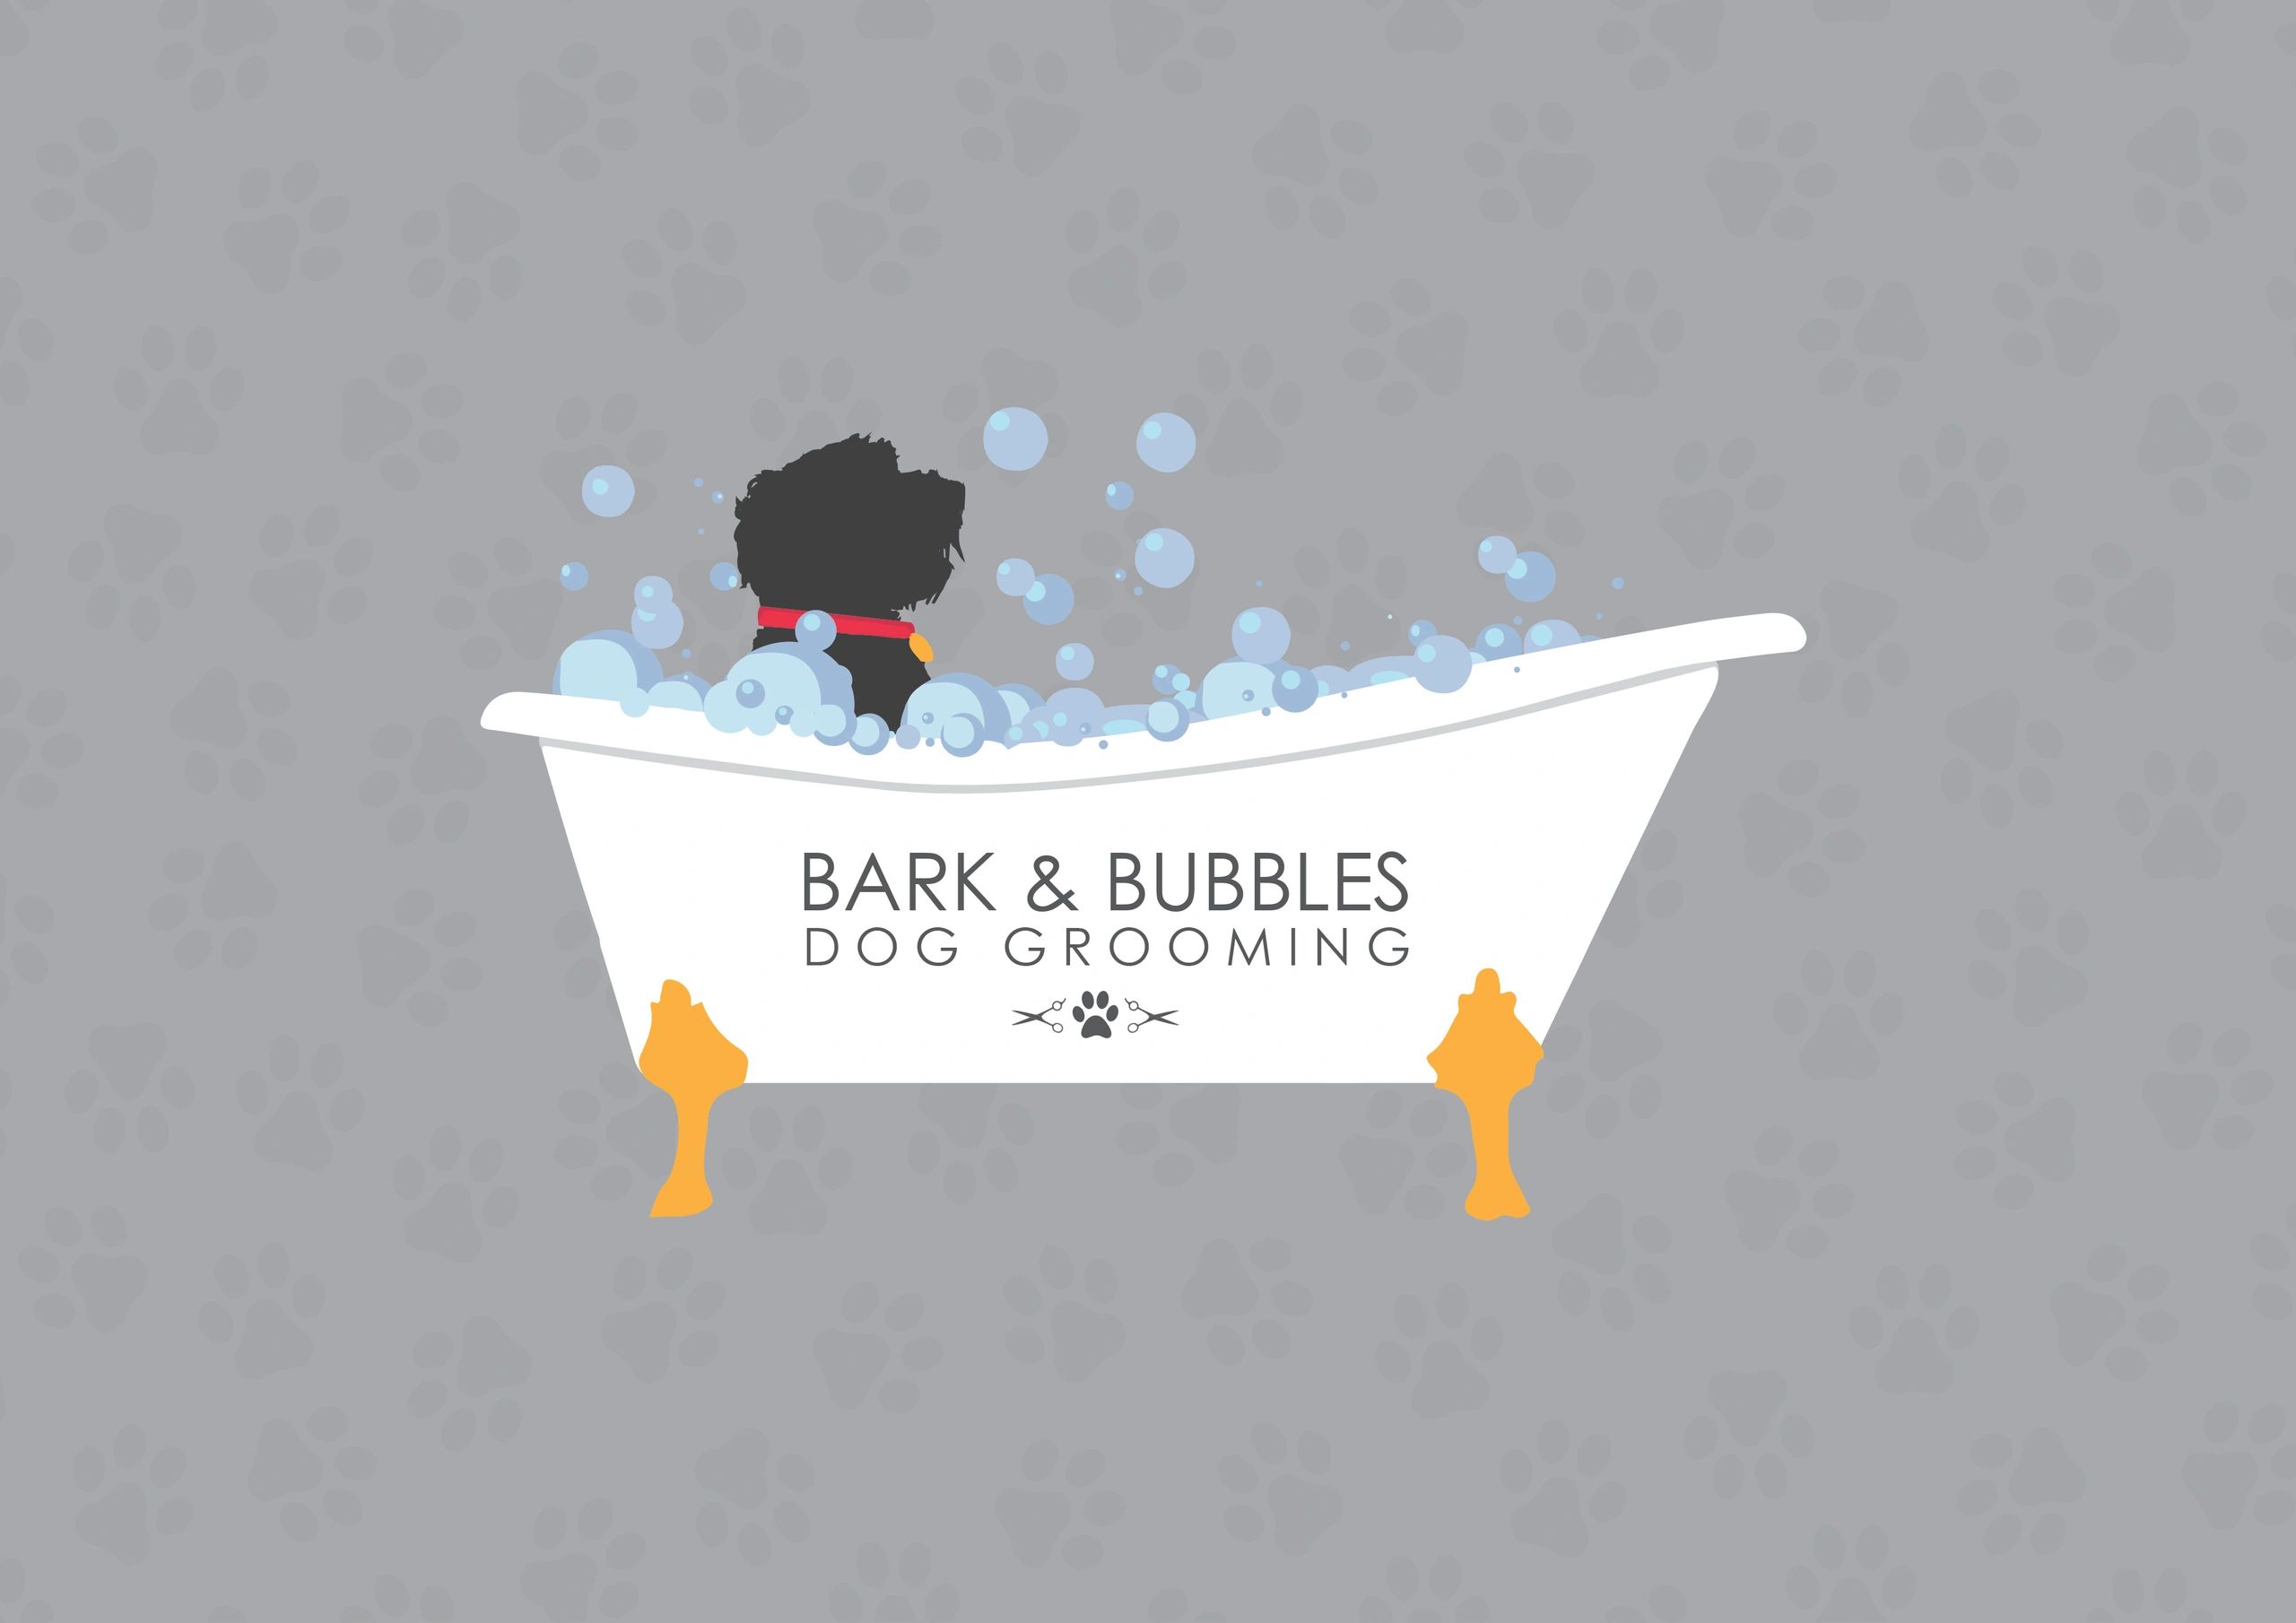 Barks & Bubbles Pet Grooming About Us